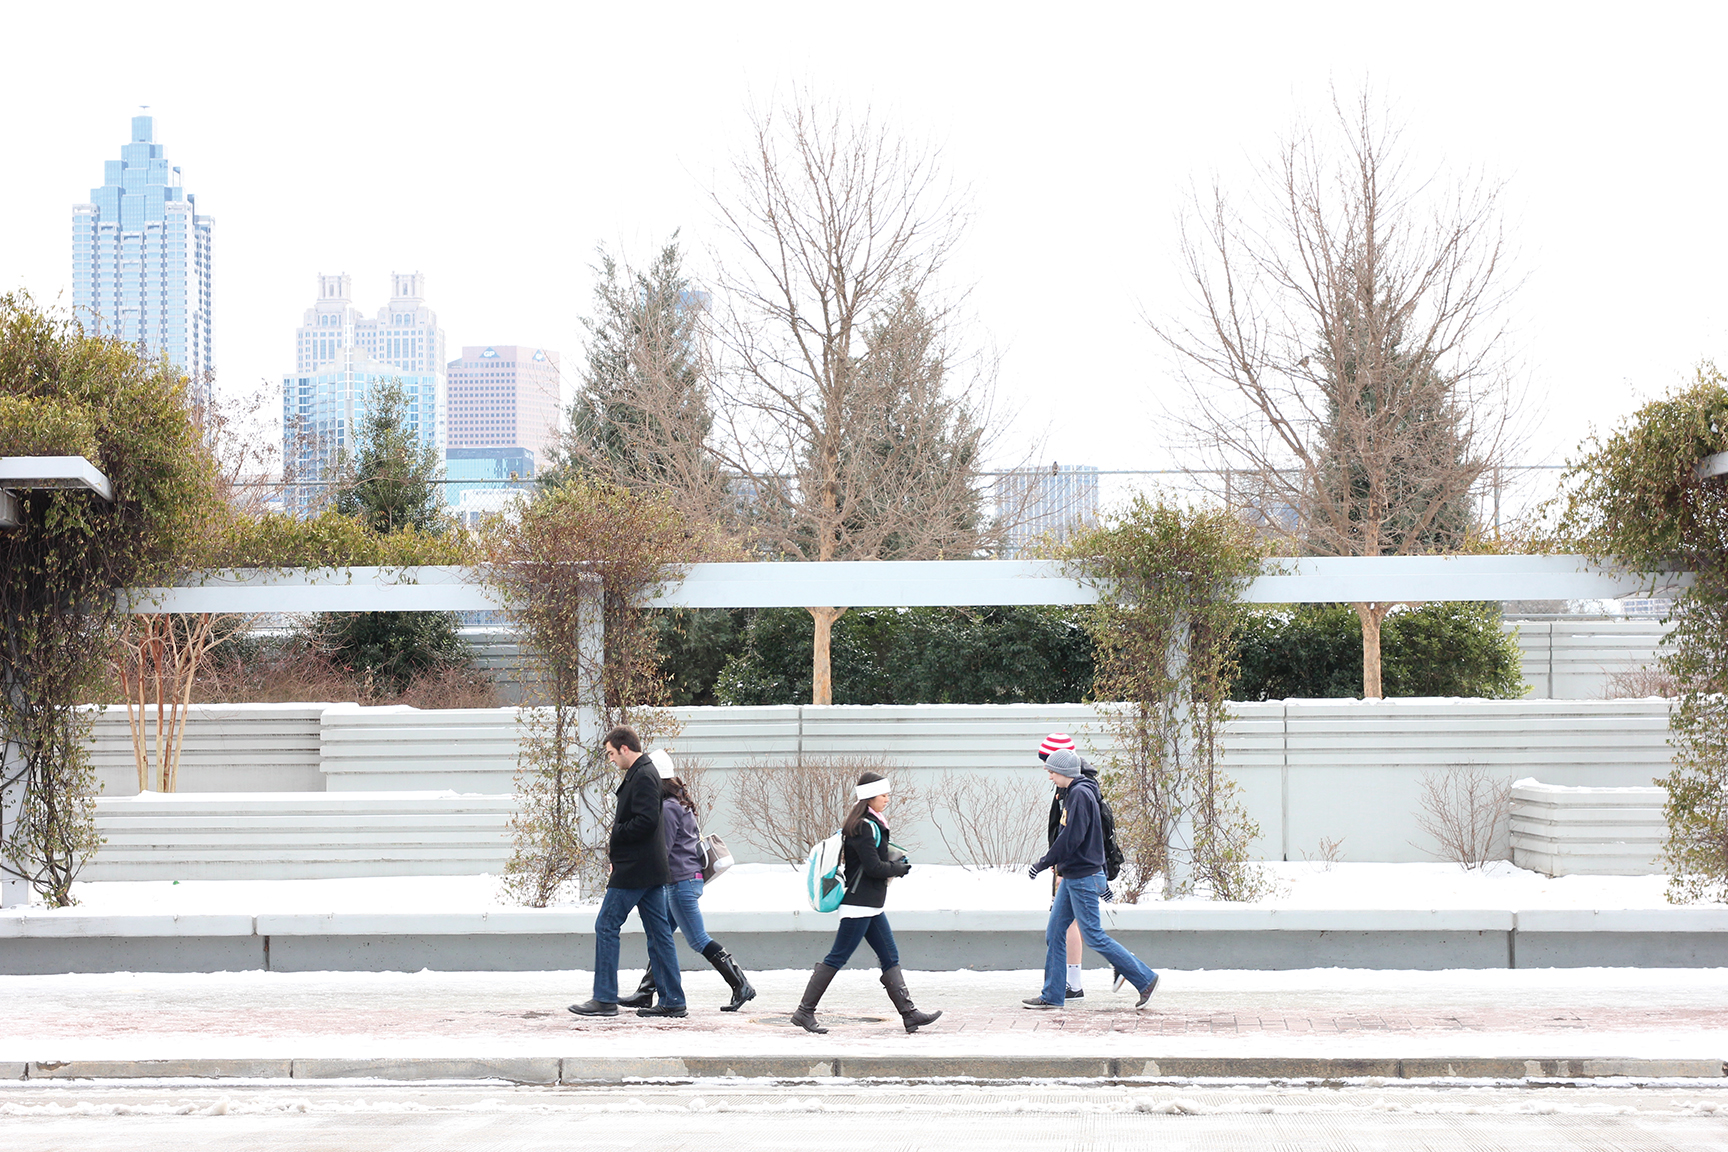 Students walk on the Fifth Street bridge during the January 2014 snow storm. Photo courtesy of GVU Center